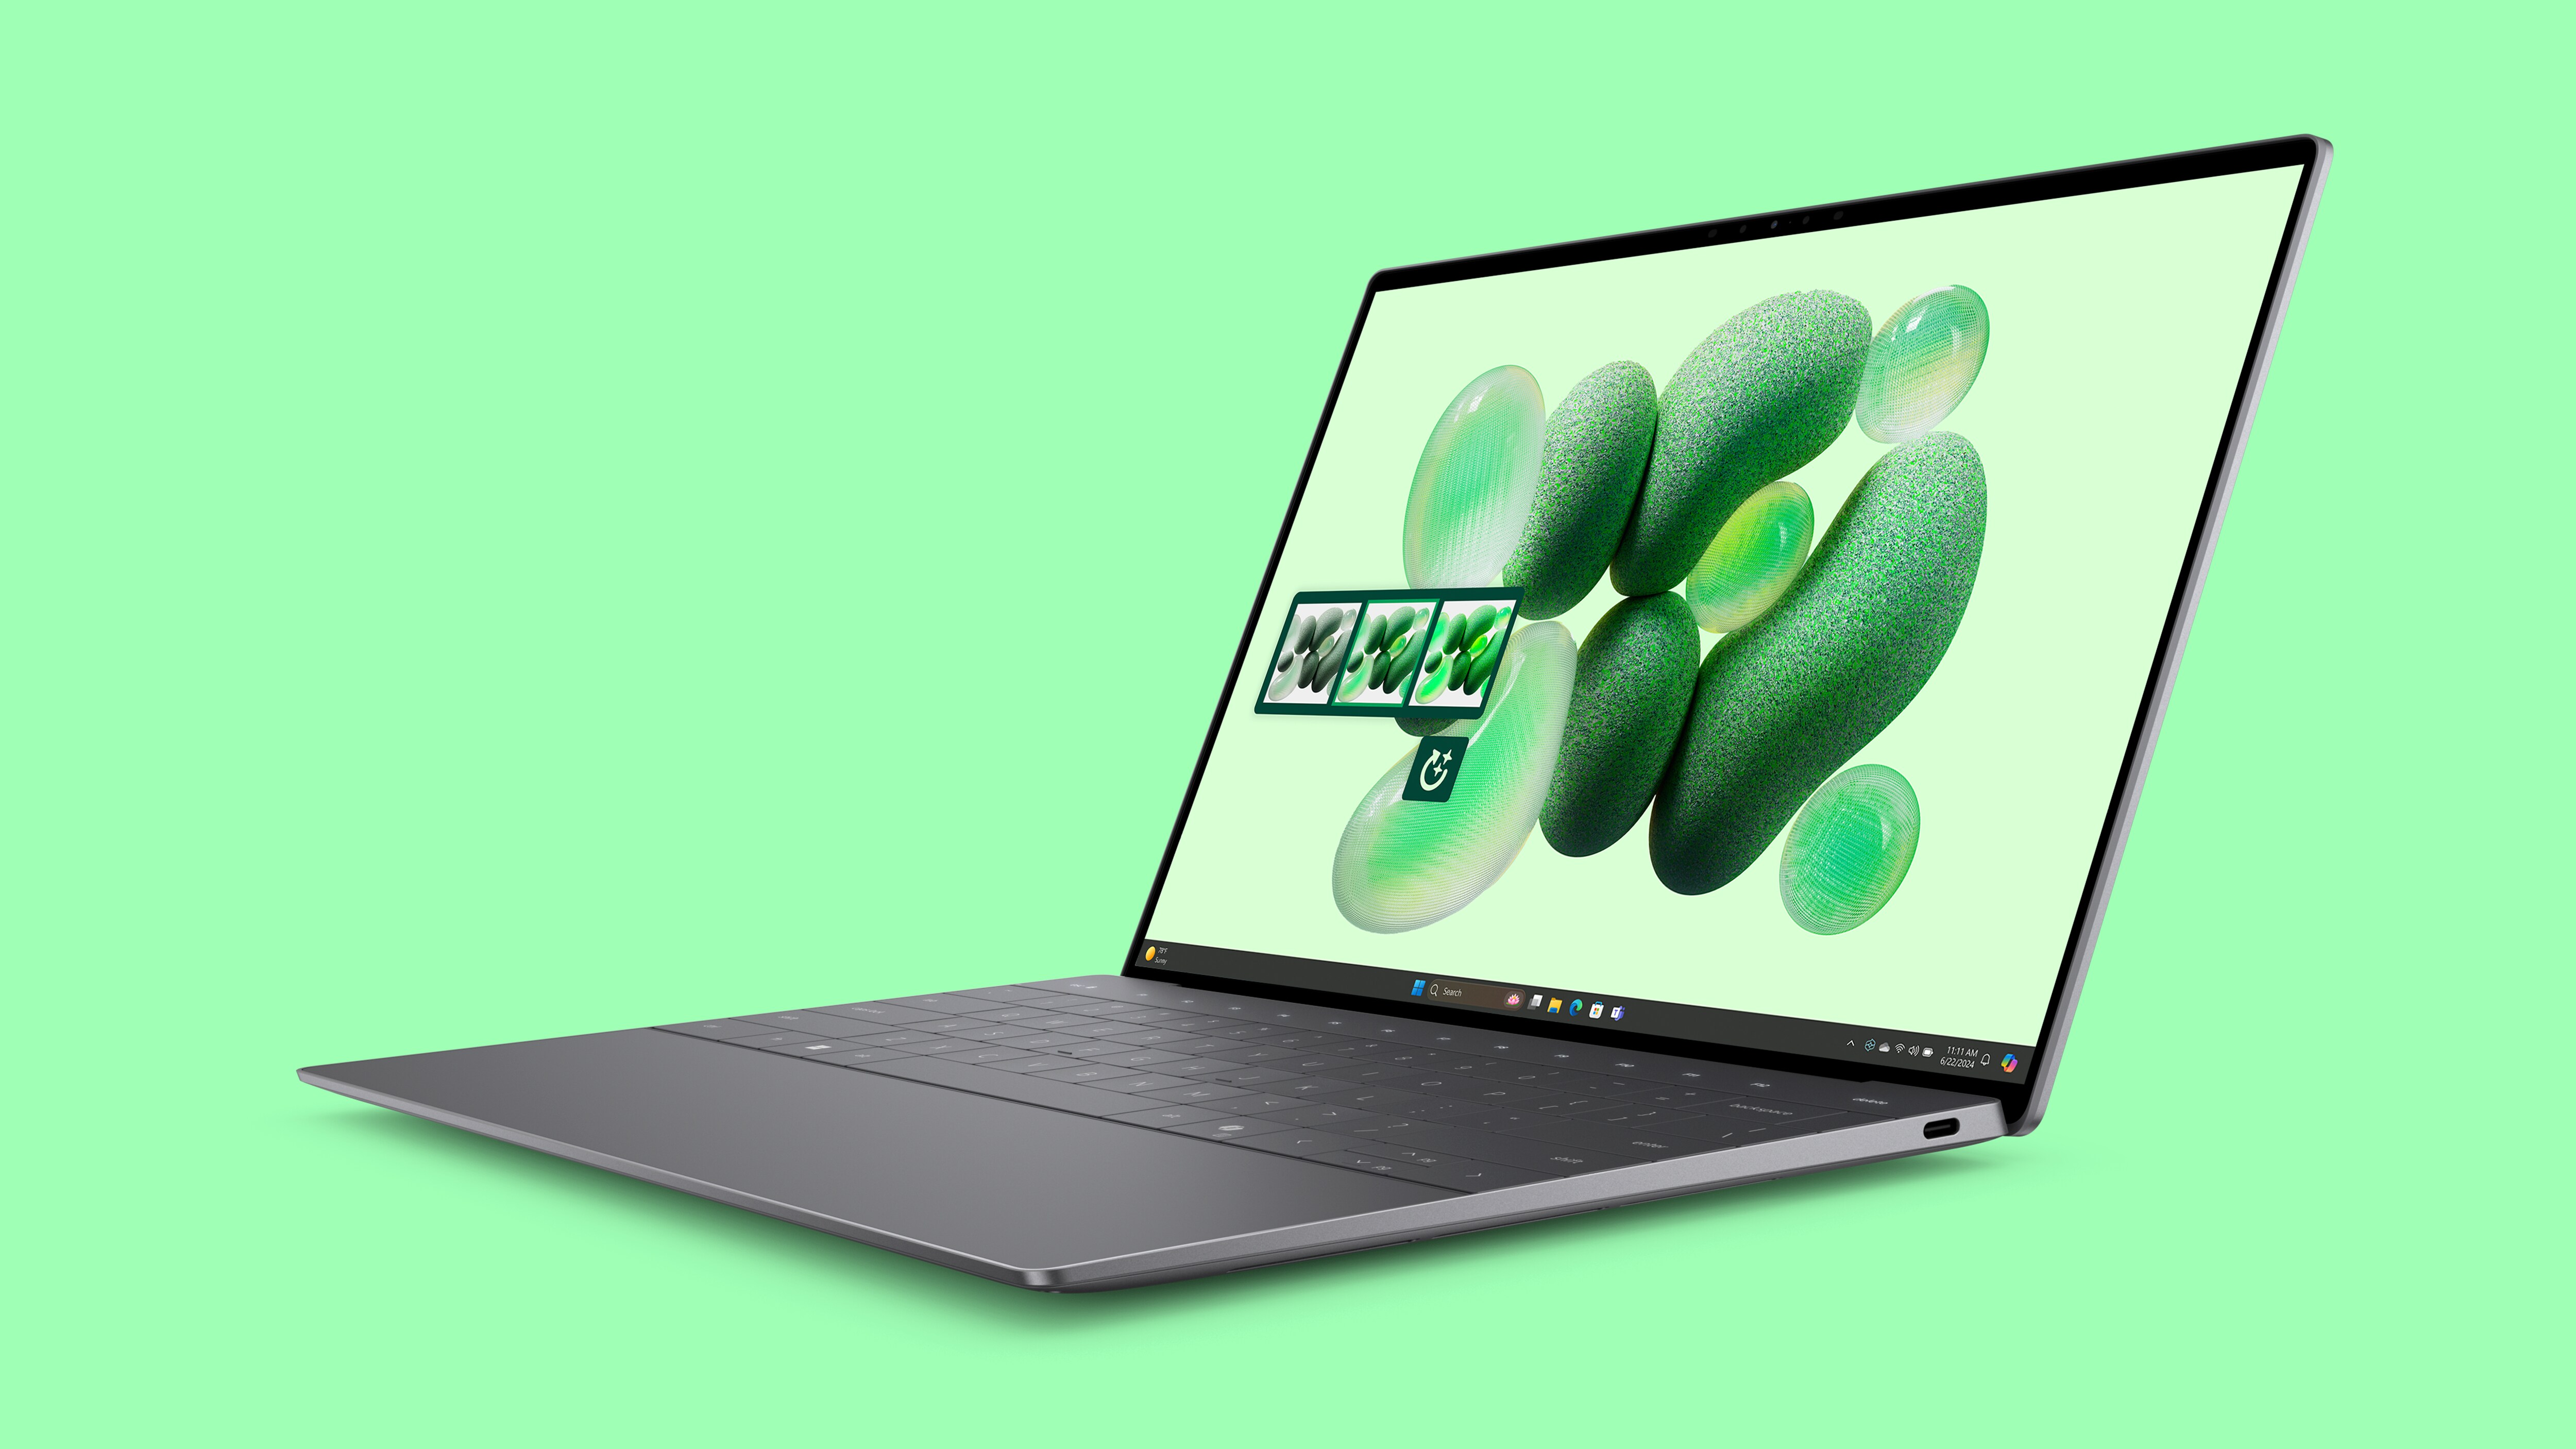 Dell XPS 13 Laptop - Thin Laptops | Dell USA